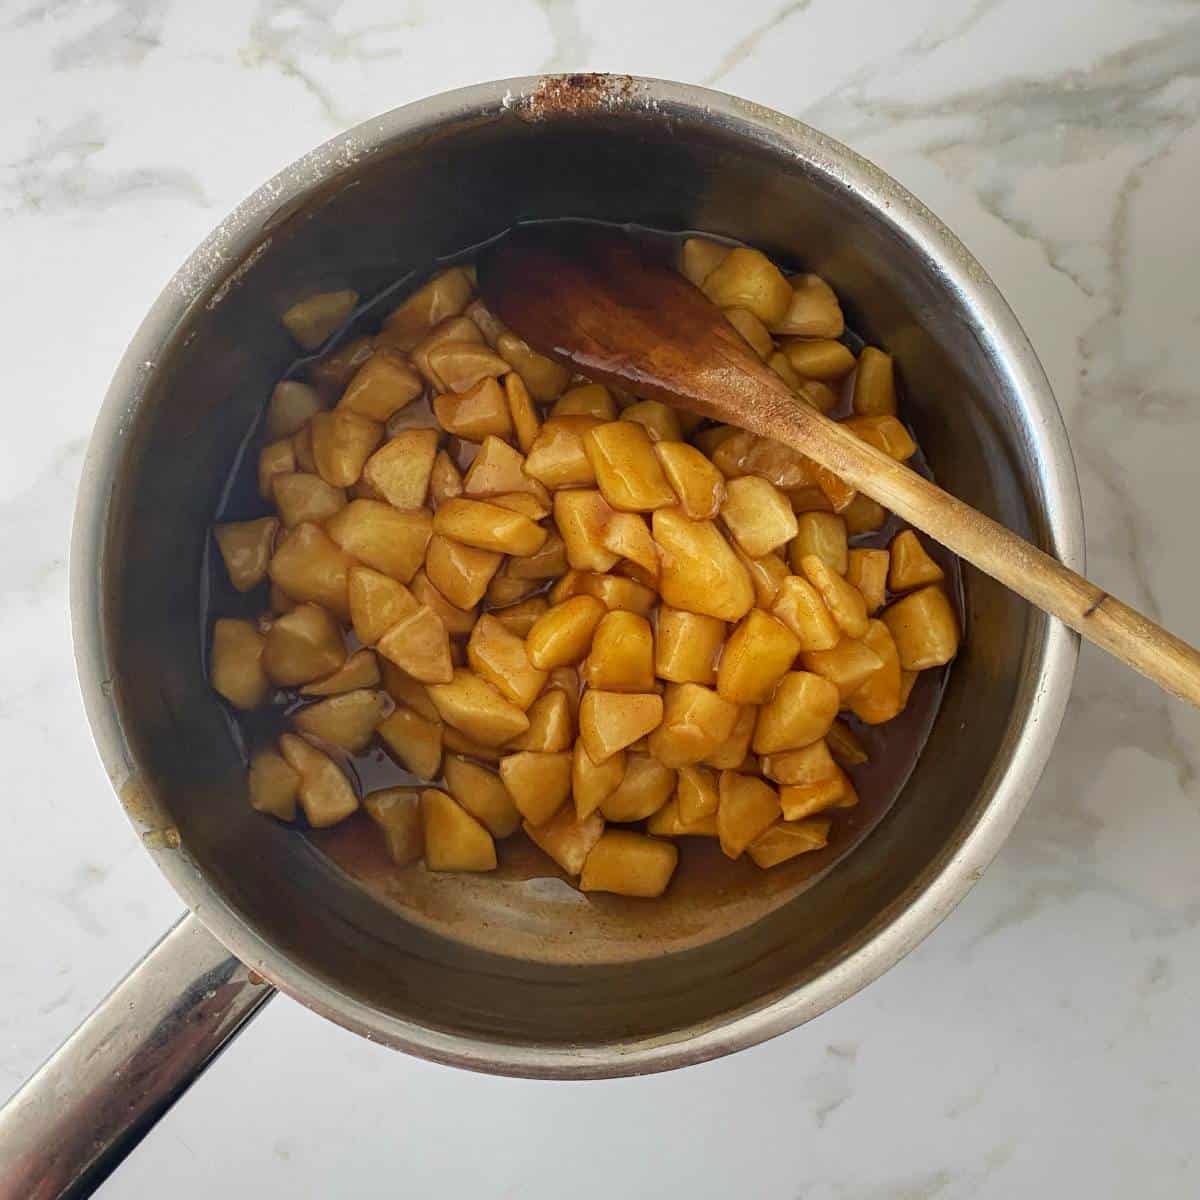 Diced apples and sugar syrup in a pot